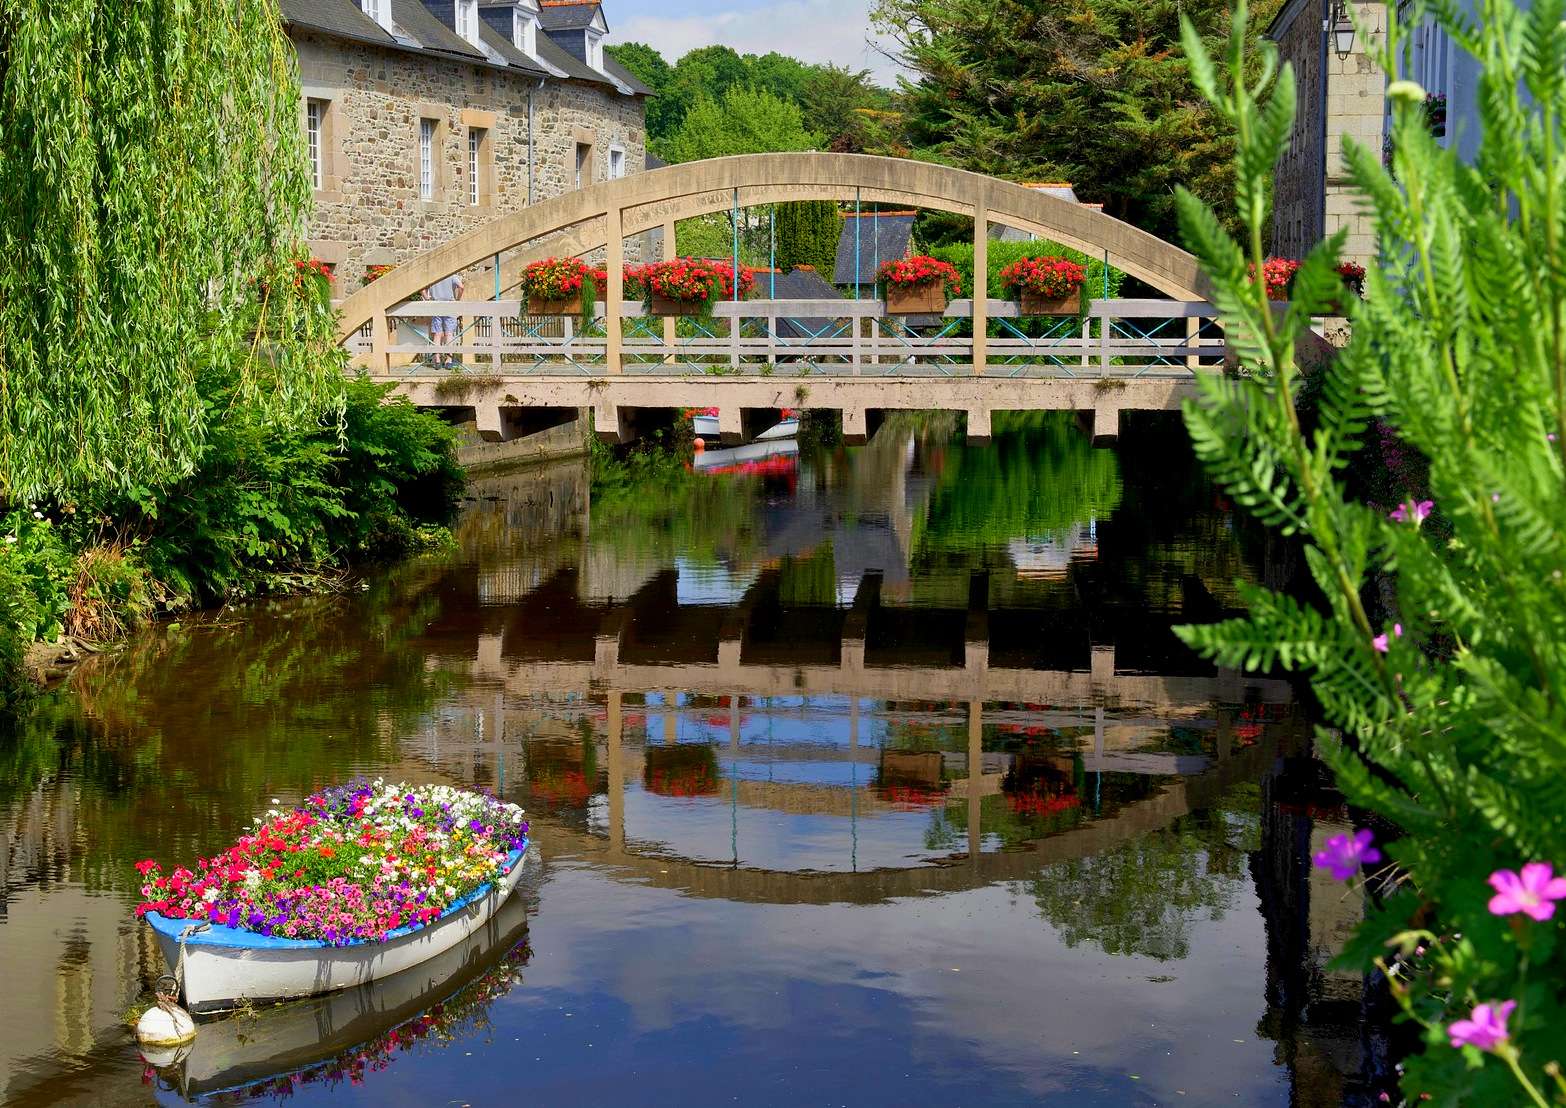 Boats full of flowers on a river in Brittany jigsaw puzzle online